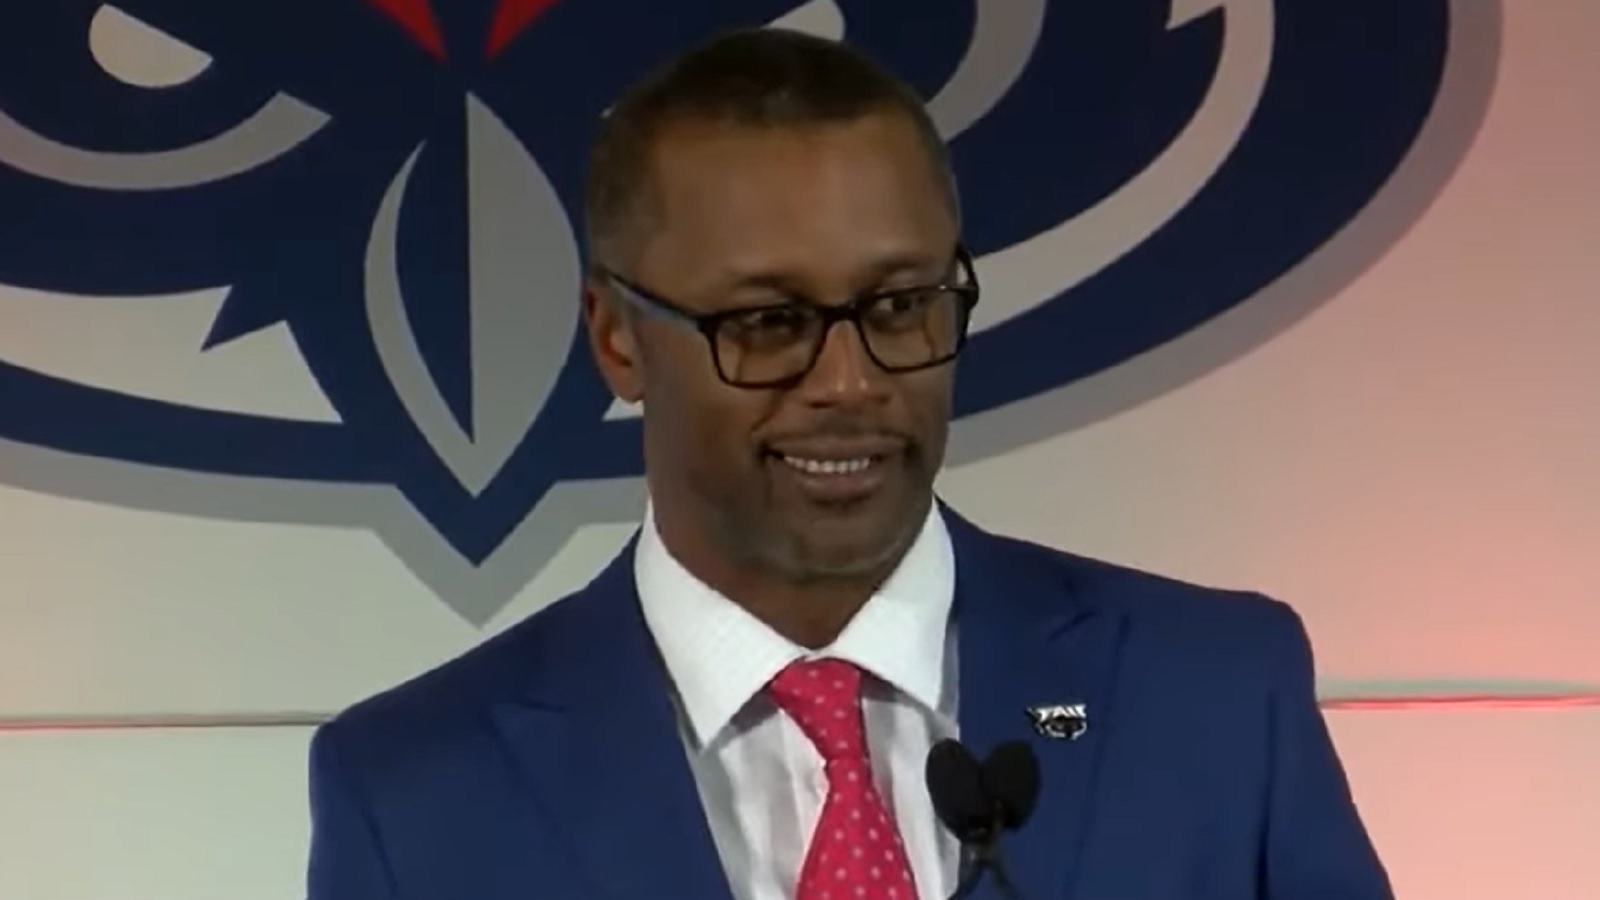 Willie Taggart fired by FAU and is running out of Florida schools to coach